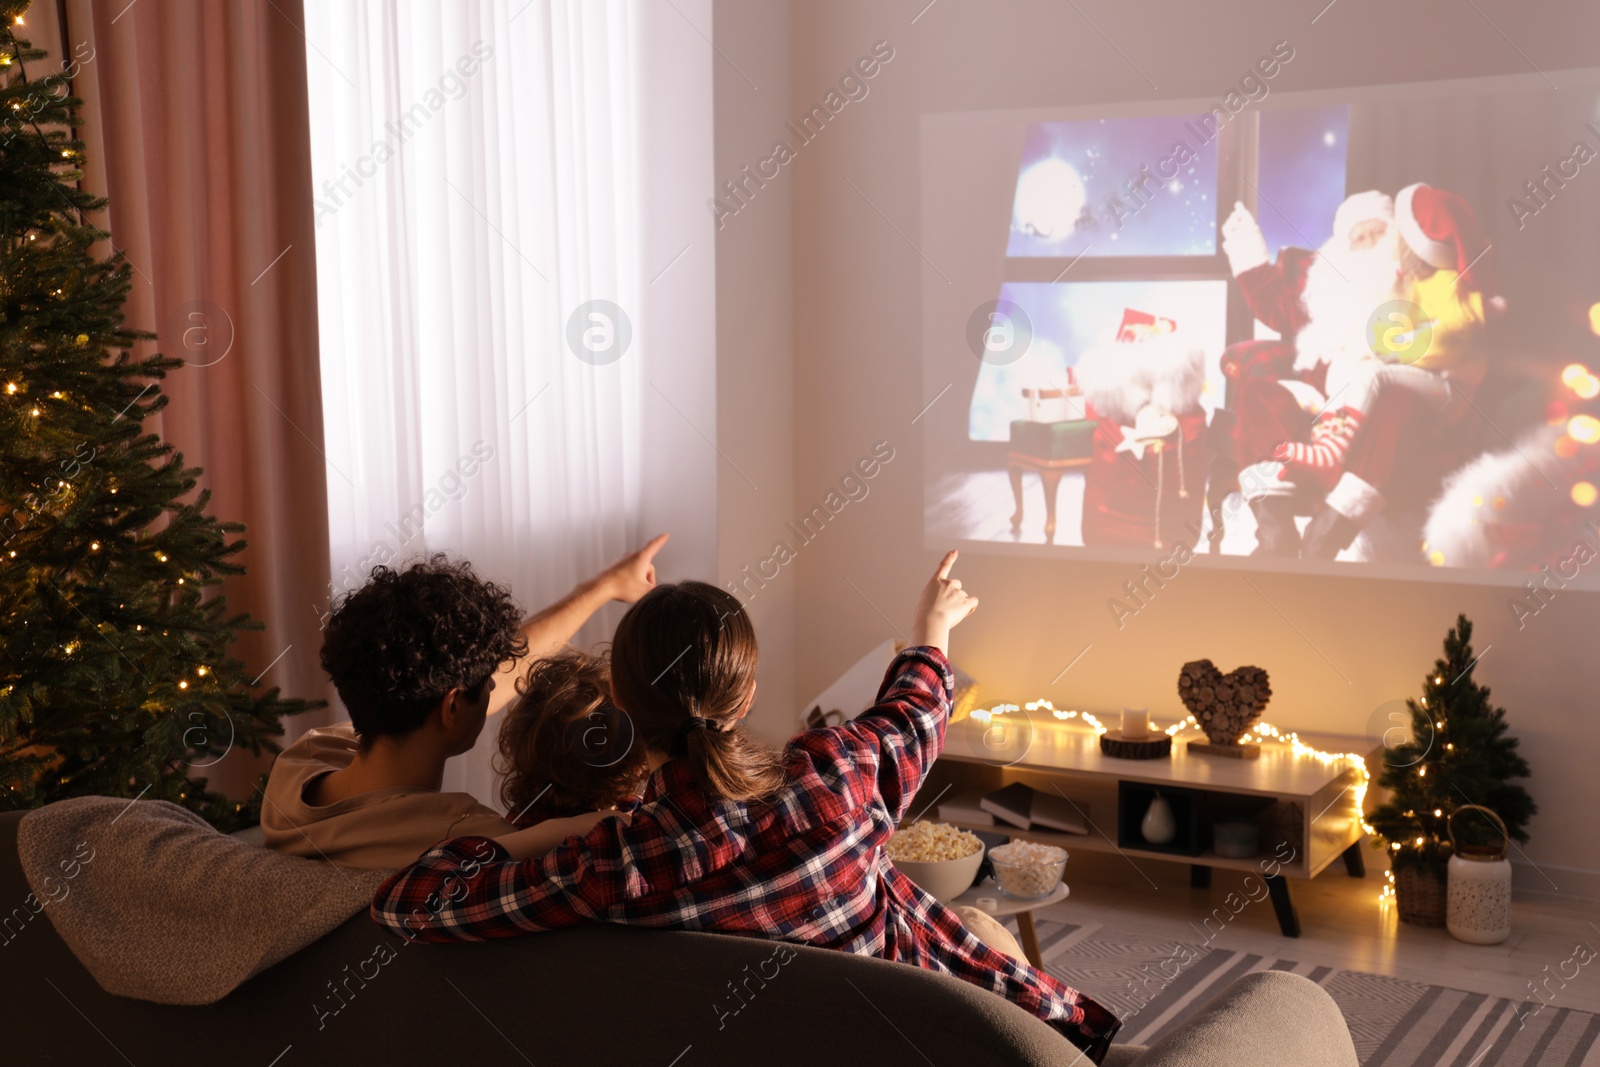 Photo of Family watching Christmas movie via video projector at home